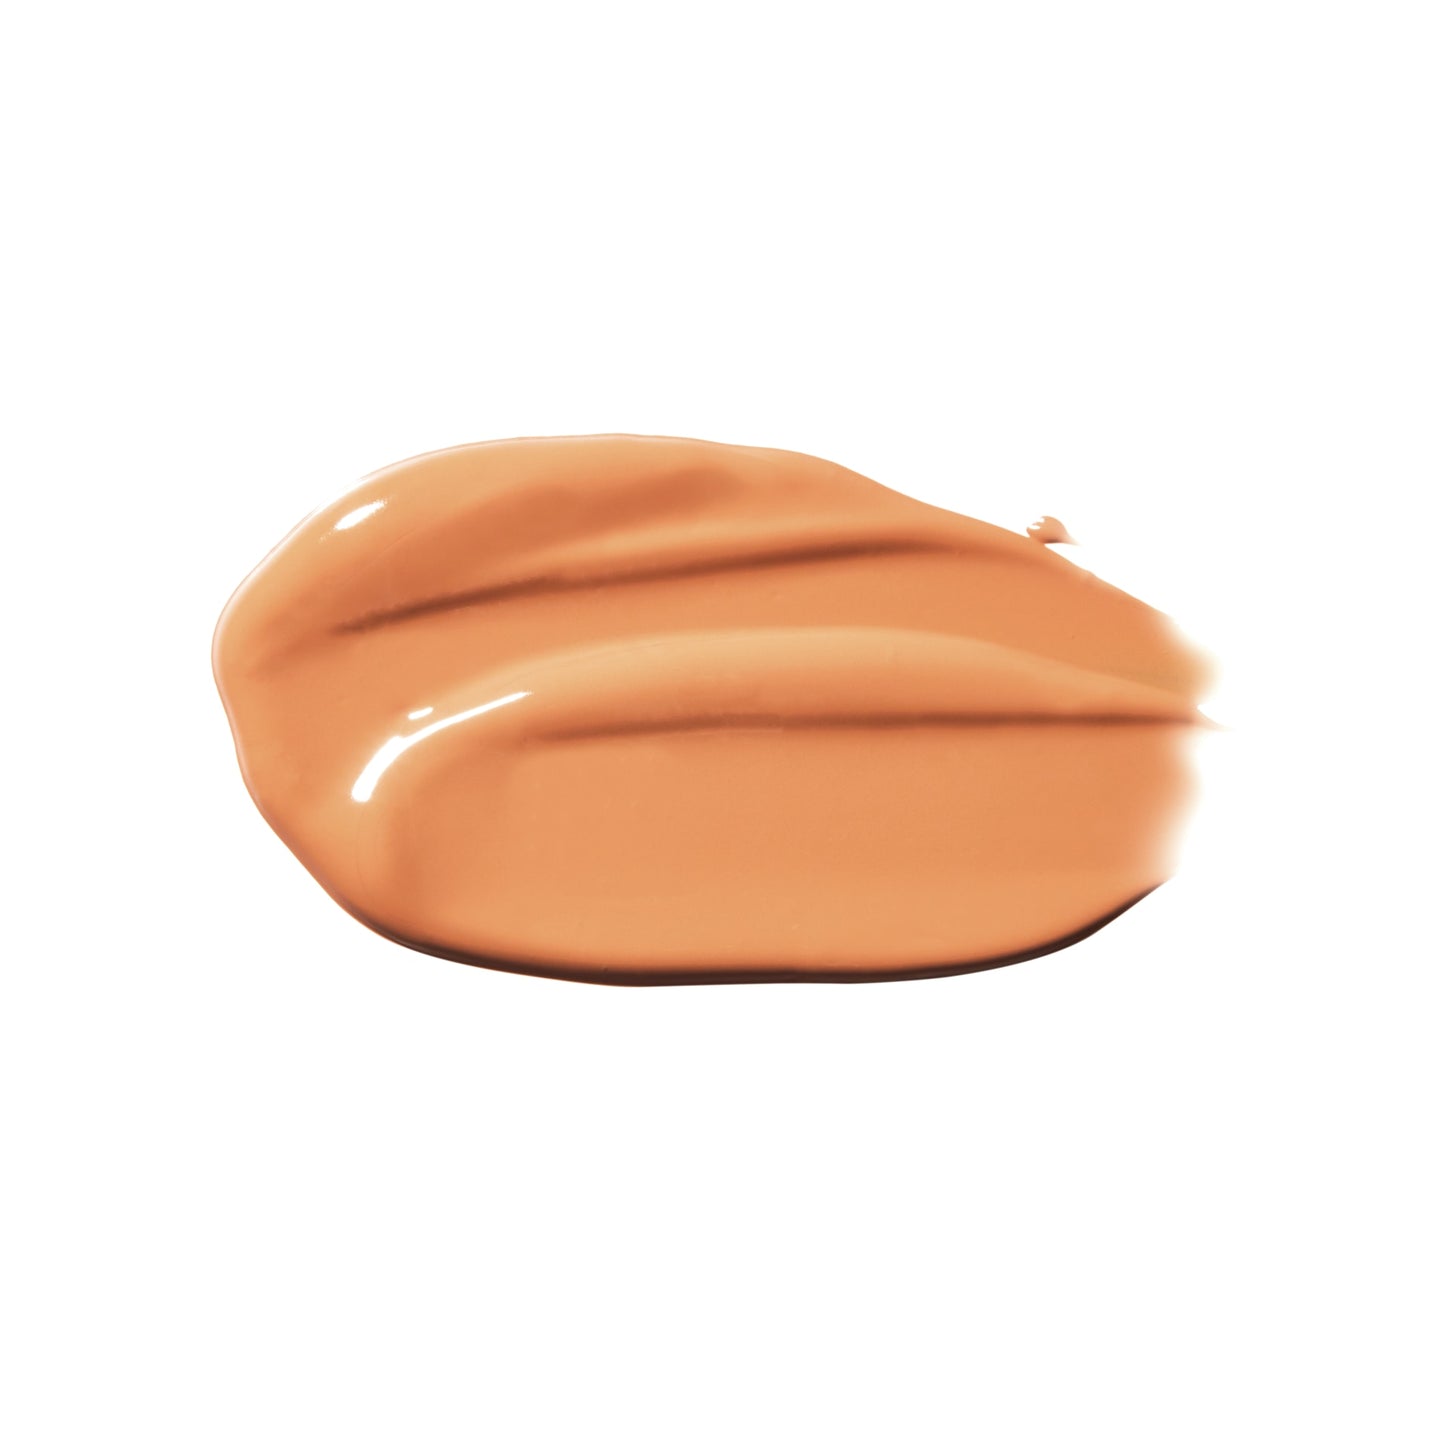 100% PURE Fruit Pigmented Healthy Foundation golden peach